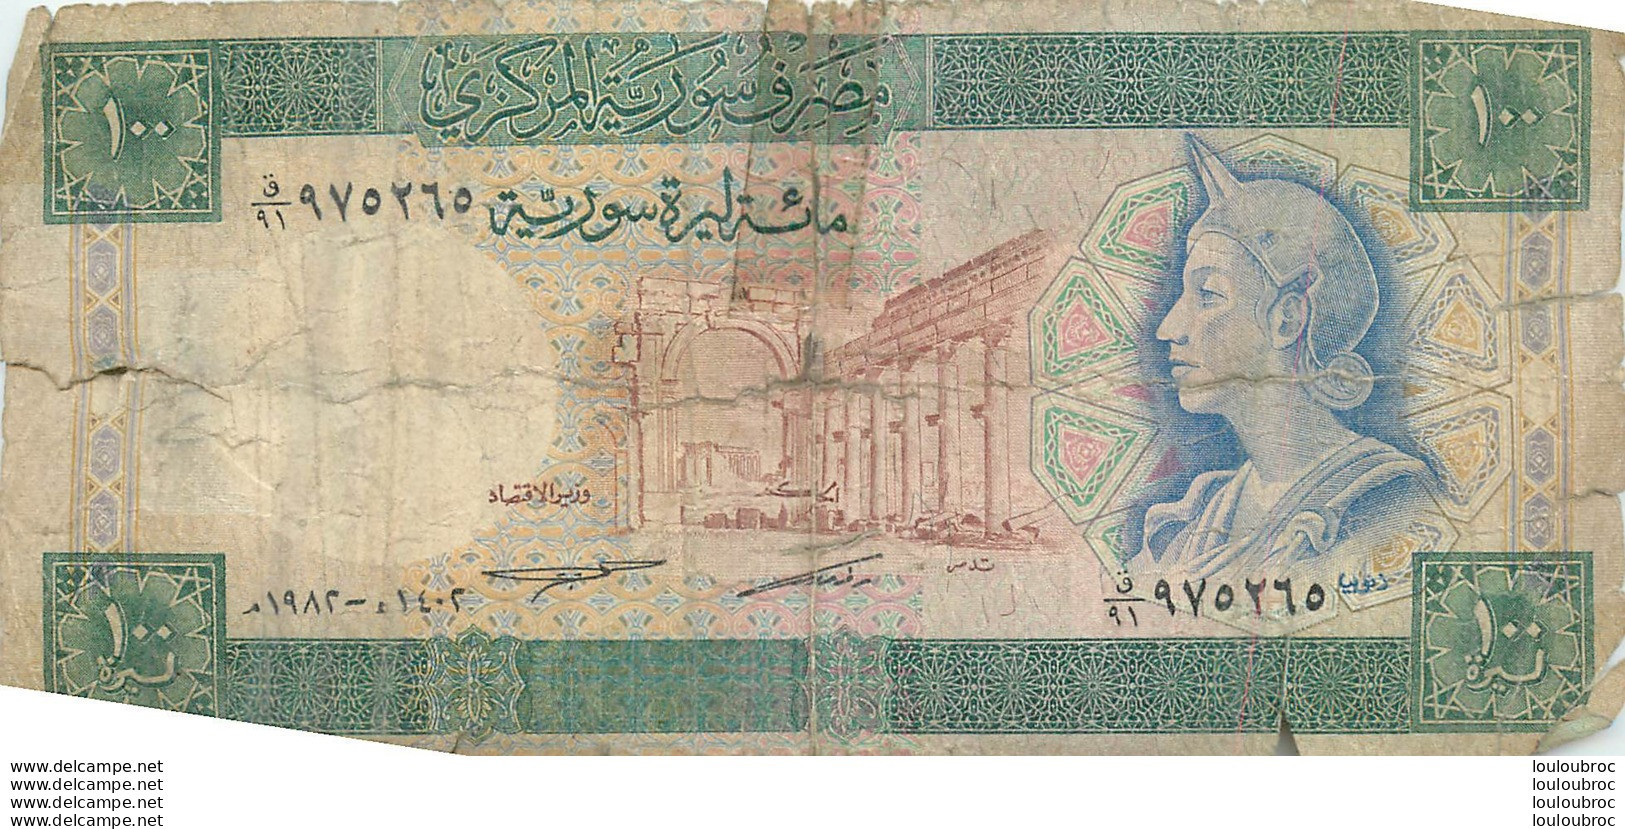 BILLET   SYRIE 100 ONE HUNDRED SYRIAN POUNDS - Syria